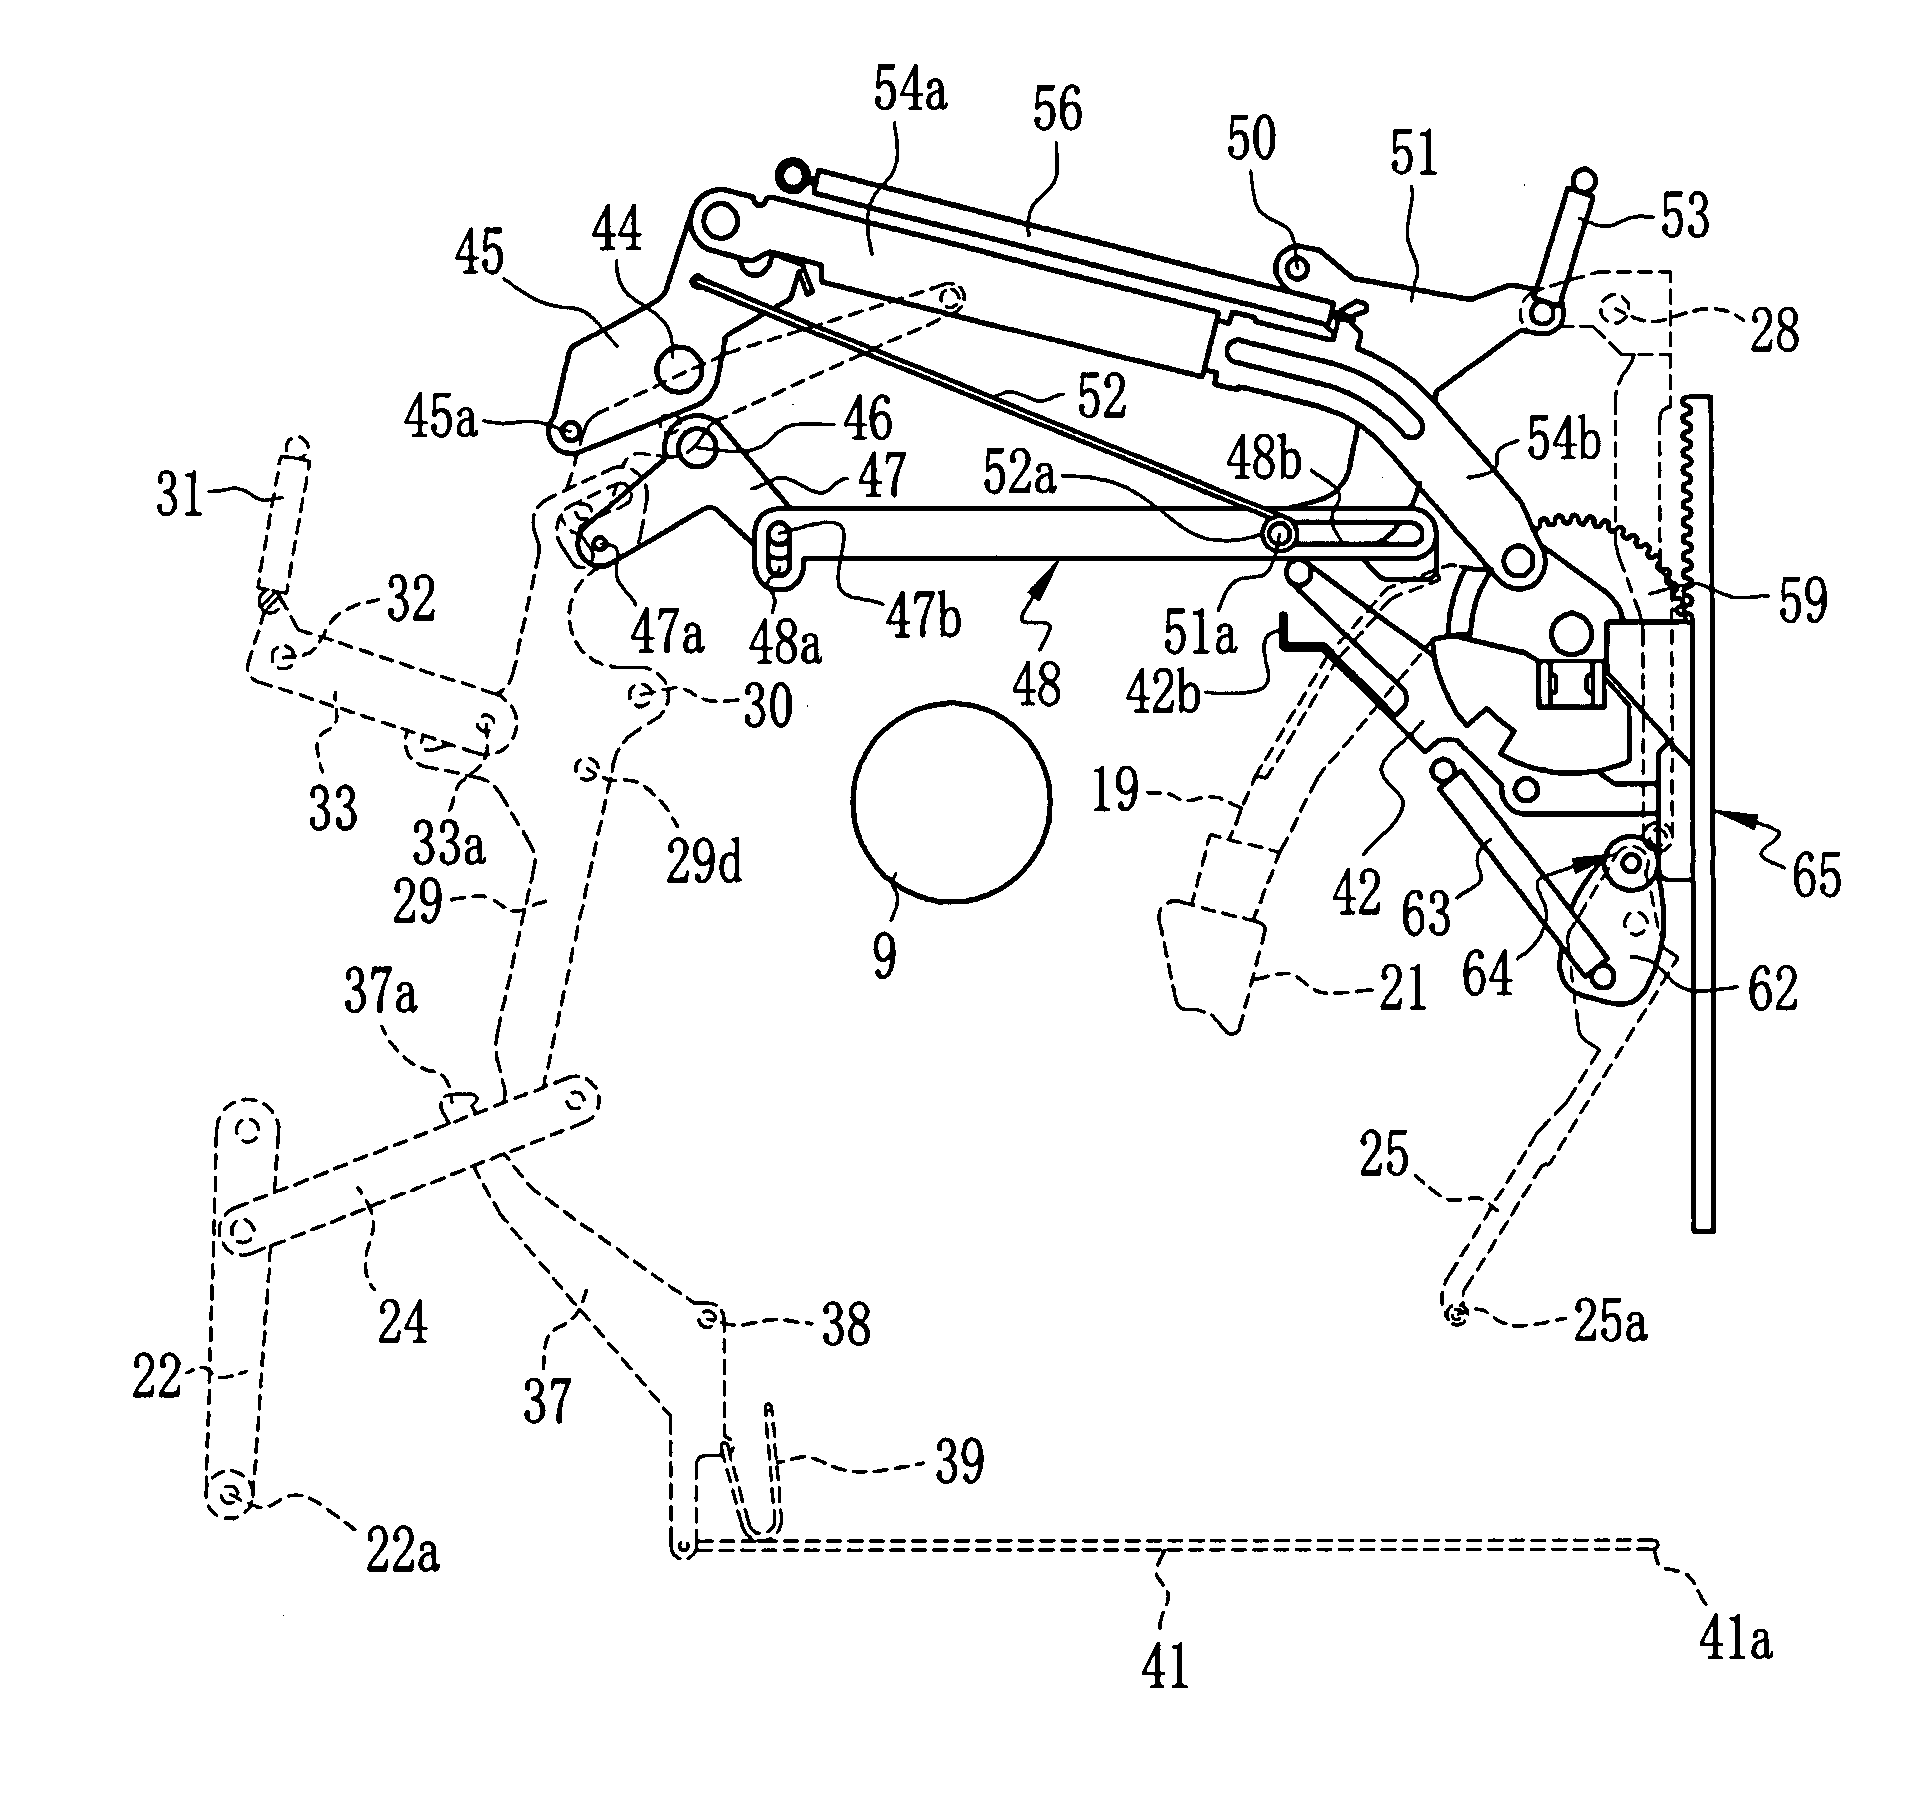 Disk device for loading and unloading disks of different sizes